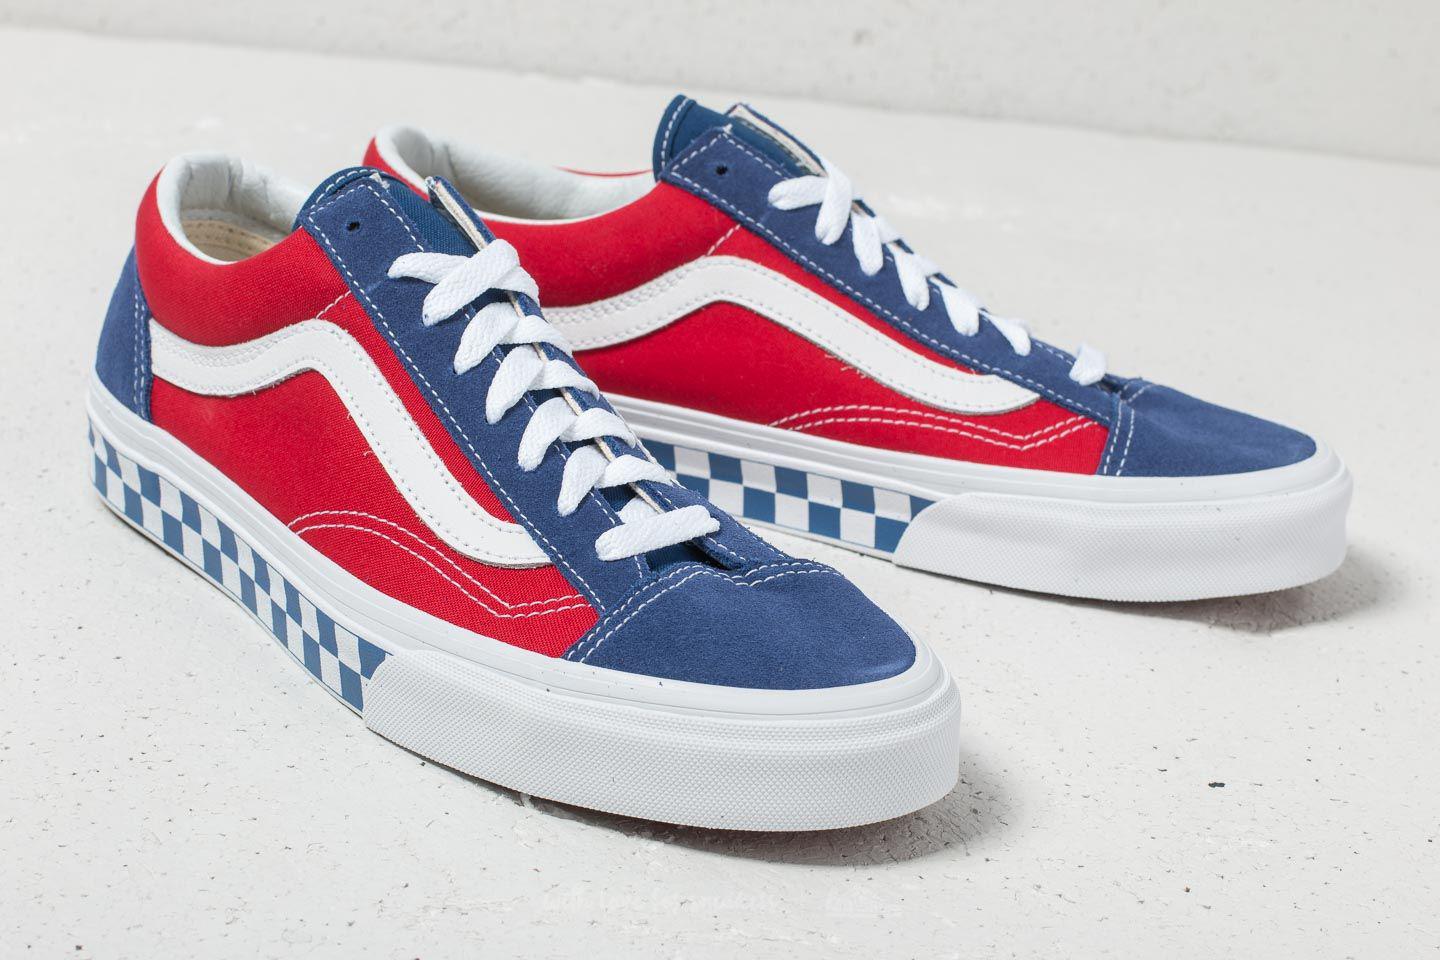 vans style 36 blue red